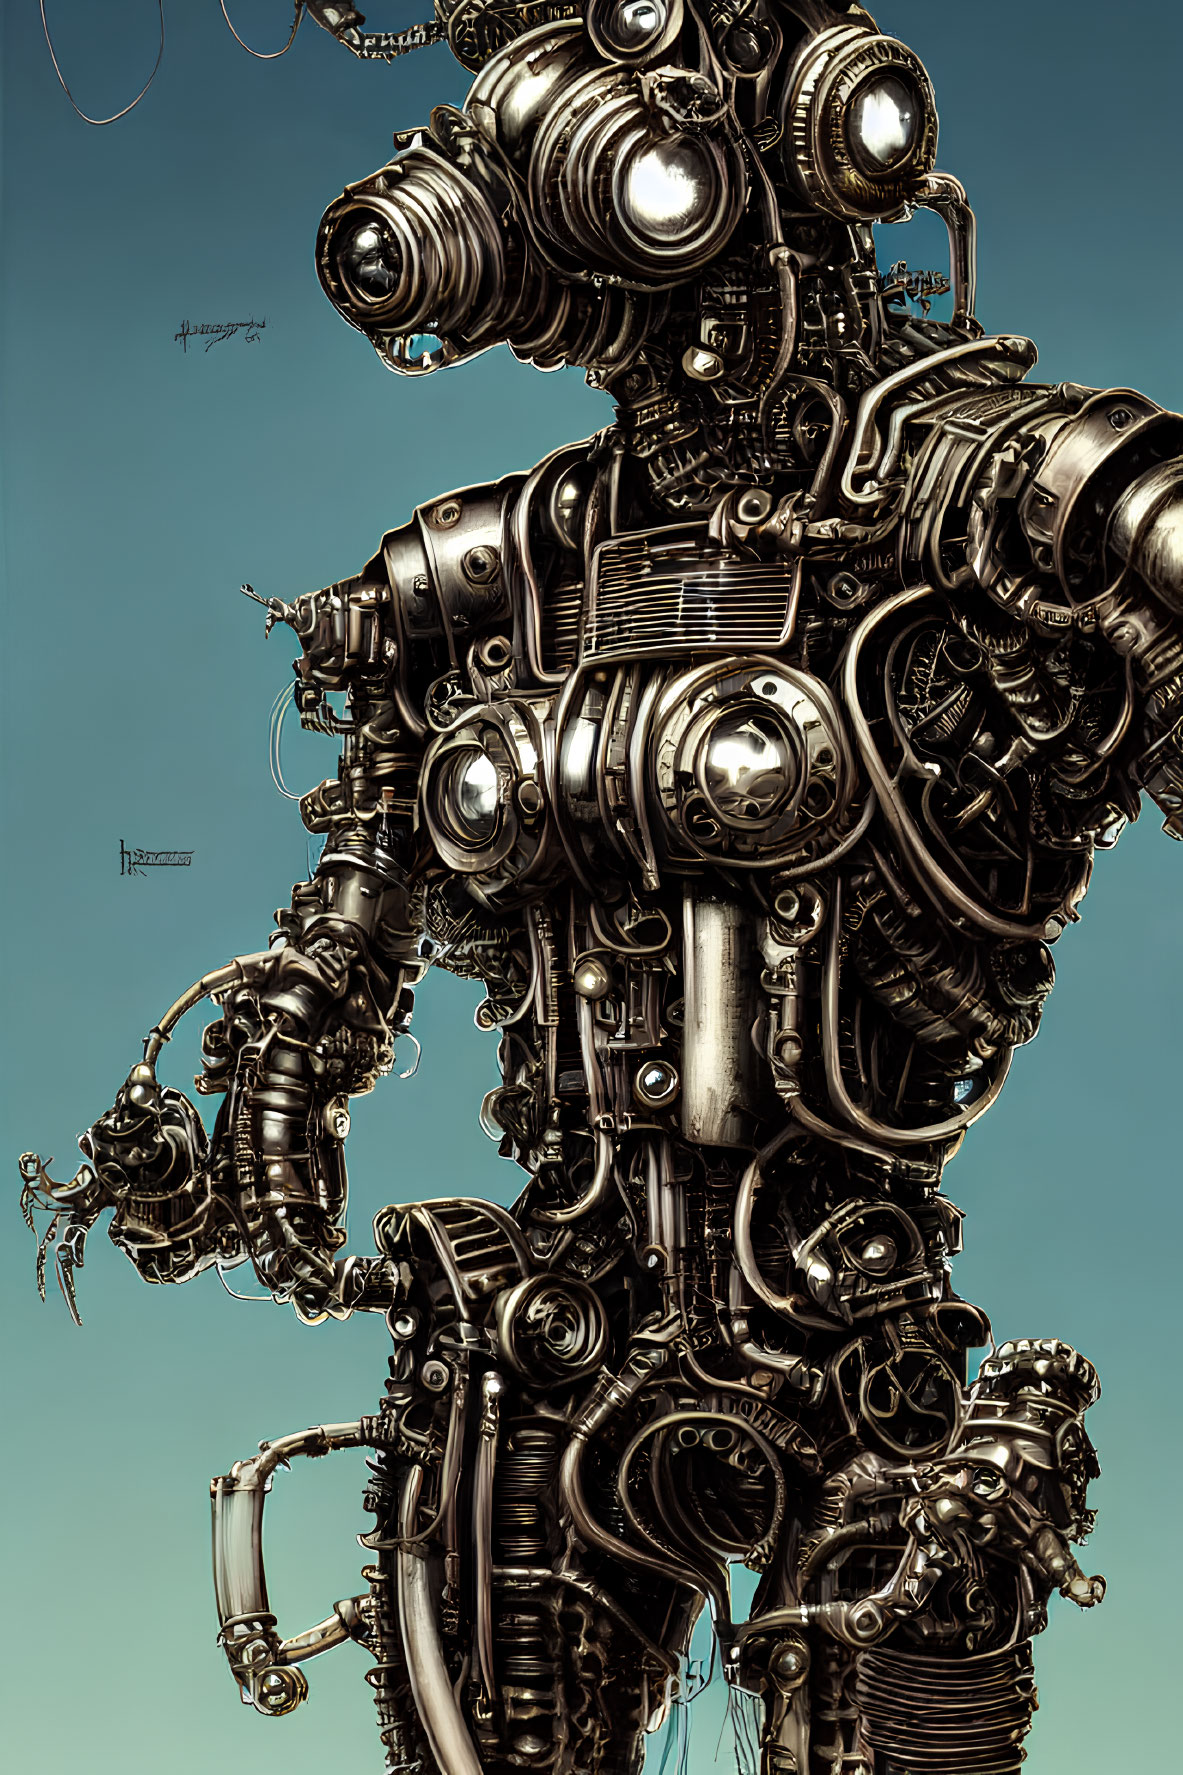 Detailed Mechanical Robot with Multiple Lenses and Metallic Parts